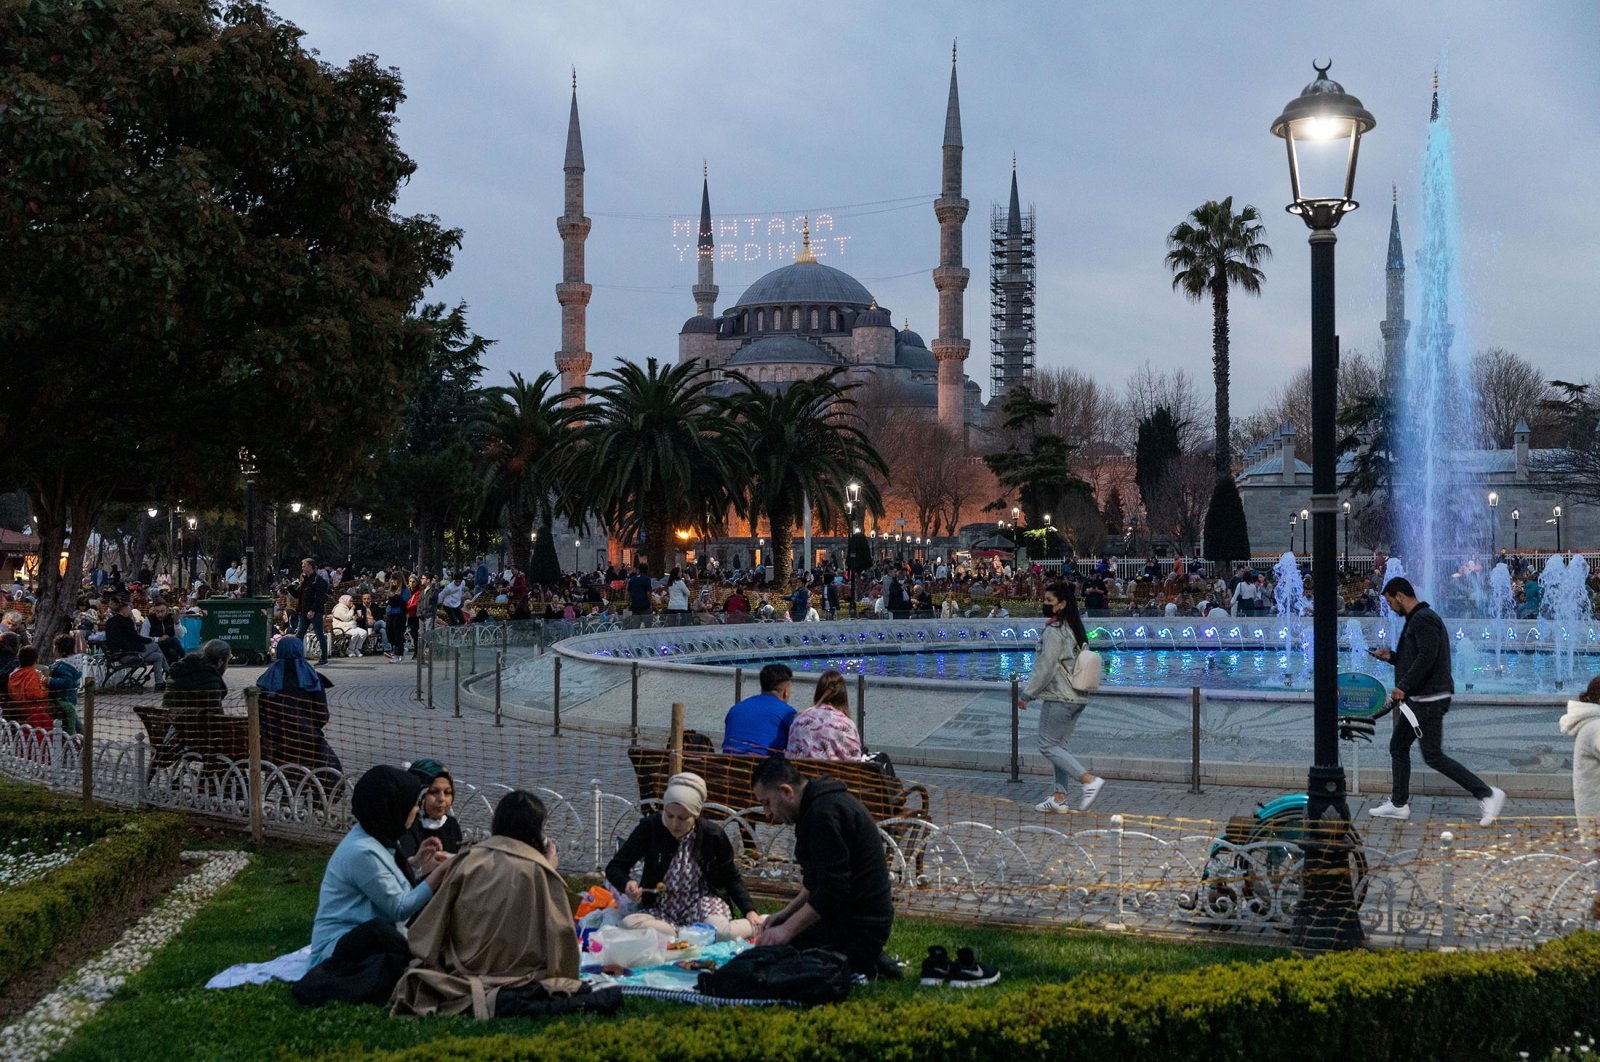 Muslims break their fast as part of iftar, in Sultanahmet Square during Ramadan, in Istanbul, Turkey, April 10, 2022. (Shutterstock Photo)